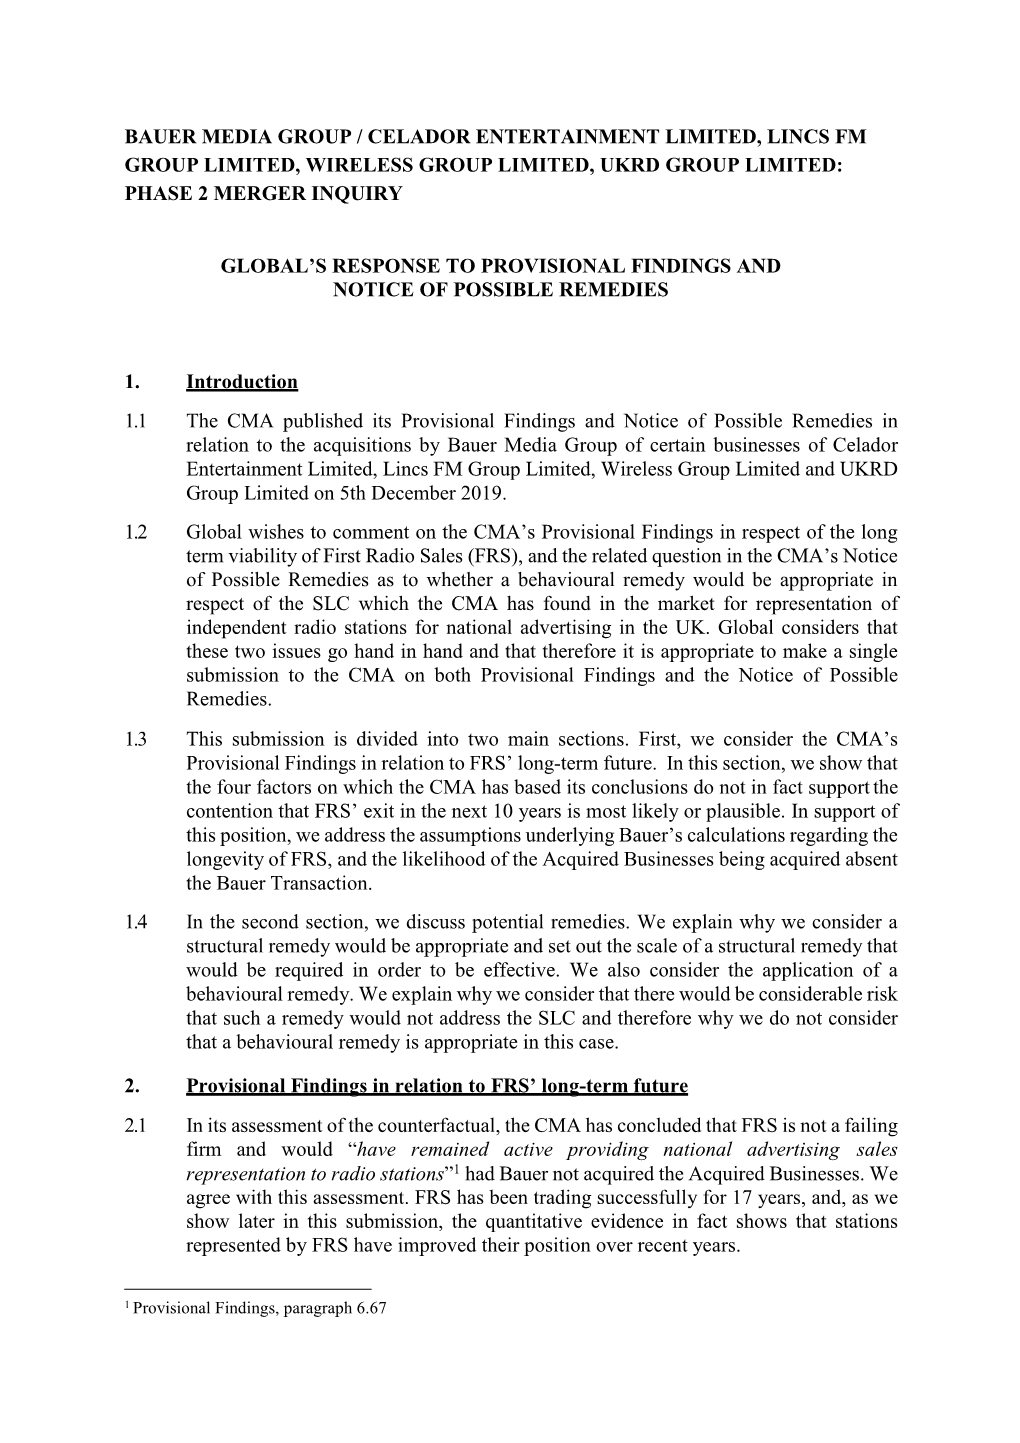 Global’S Response to Provisional Findings and Notice of Possible Remedies